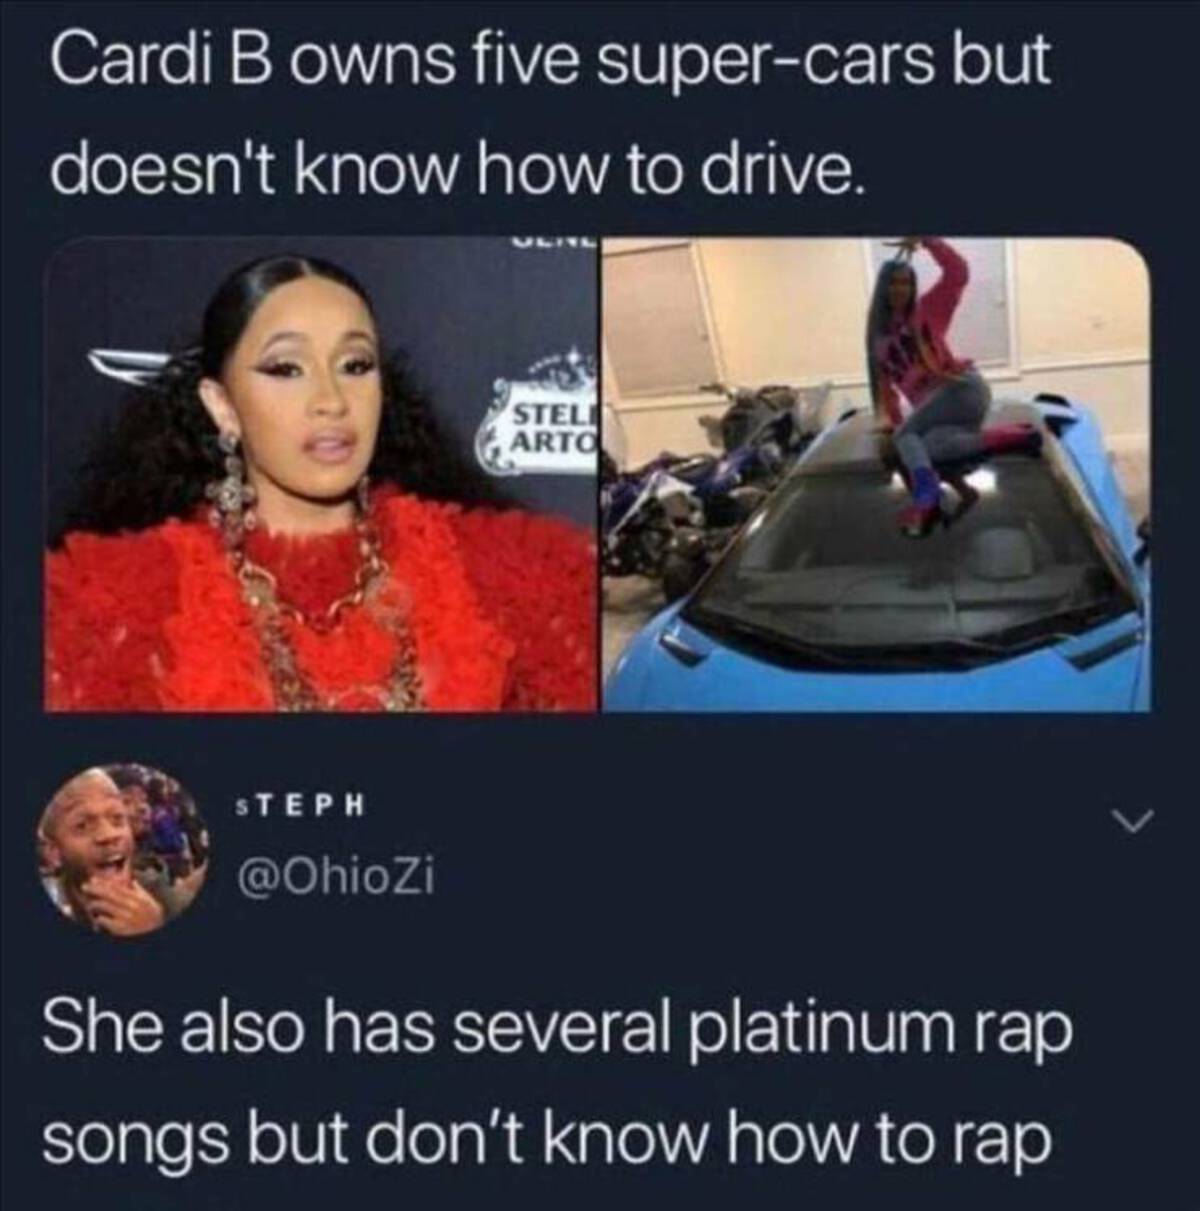 rare insults cardi b - Cardi B owns five supercars but doesn't know how to drive. Stel Arto Steph She also has several platinum rap songs but don't know how to rap